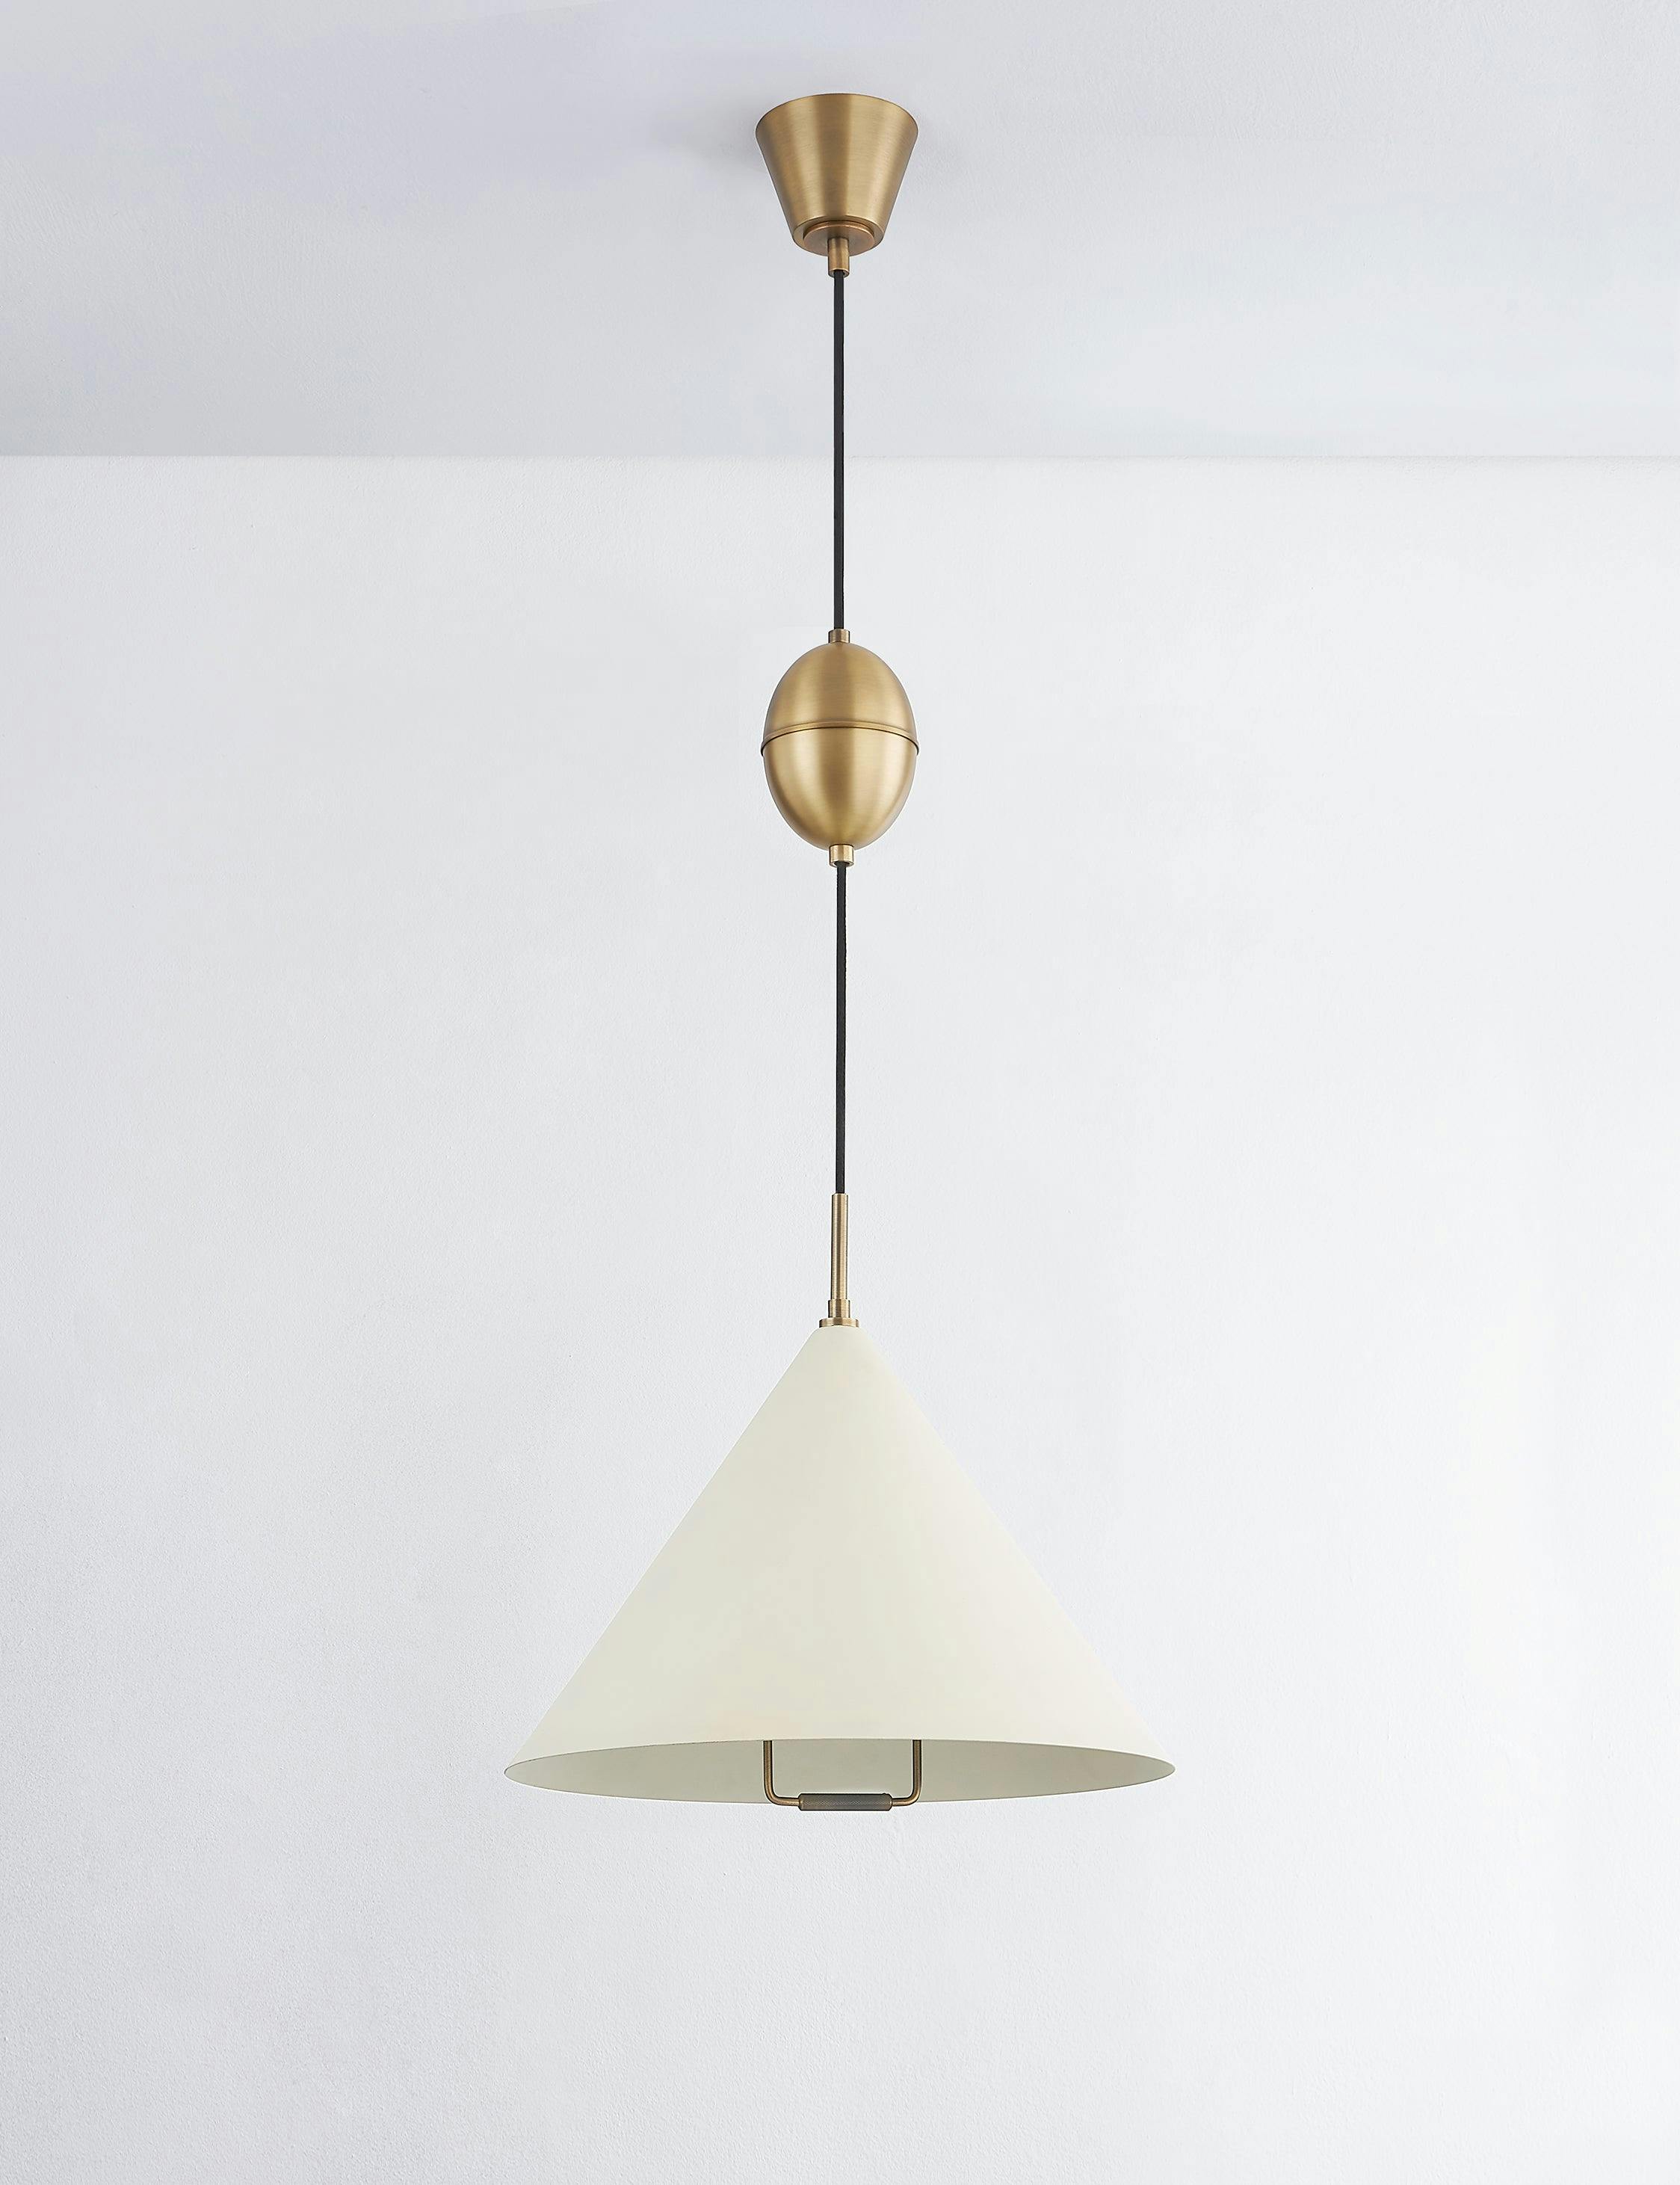 Maria Adjustable Pendant Light in Patina Brass with Soft Sand Shade